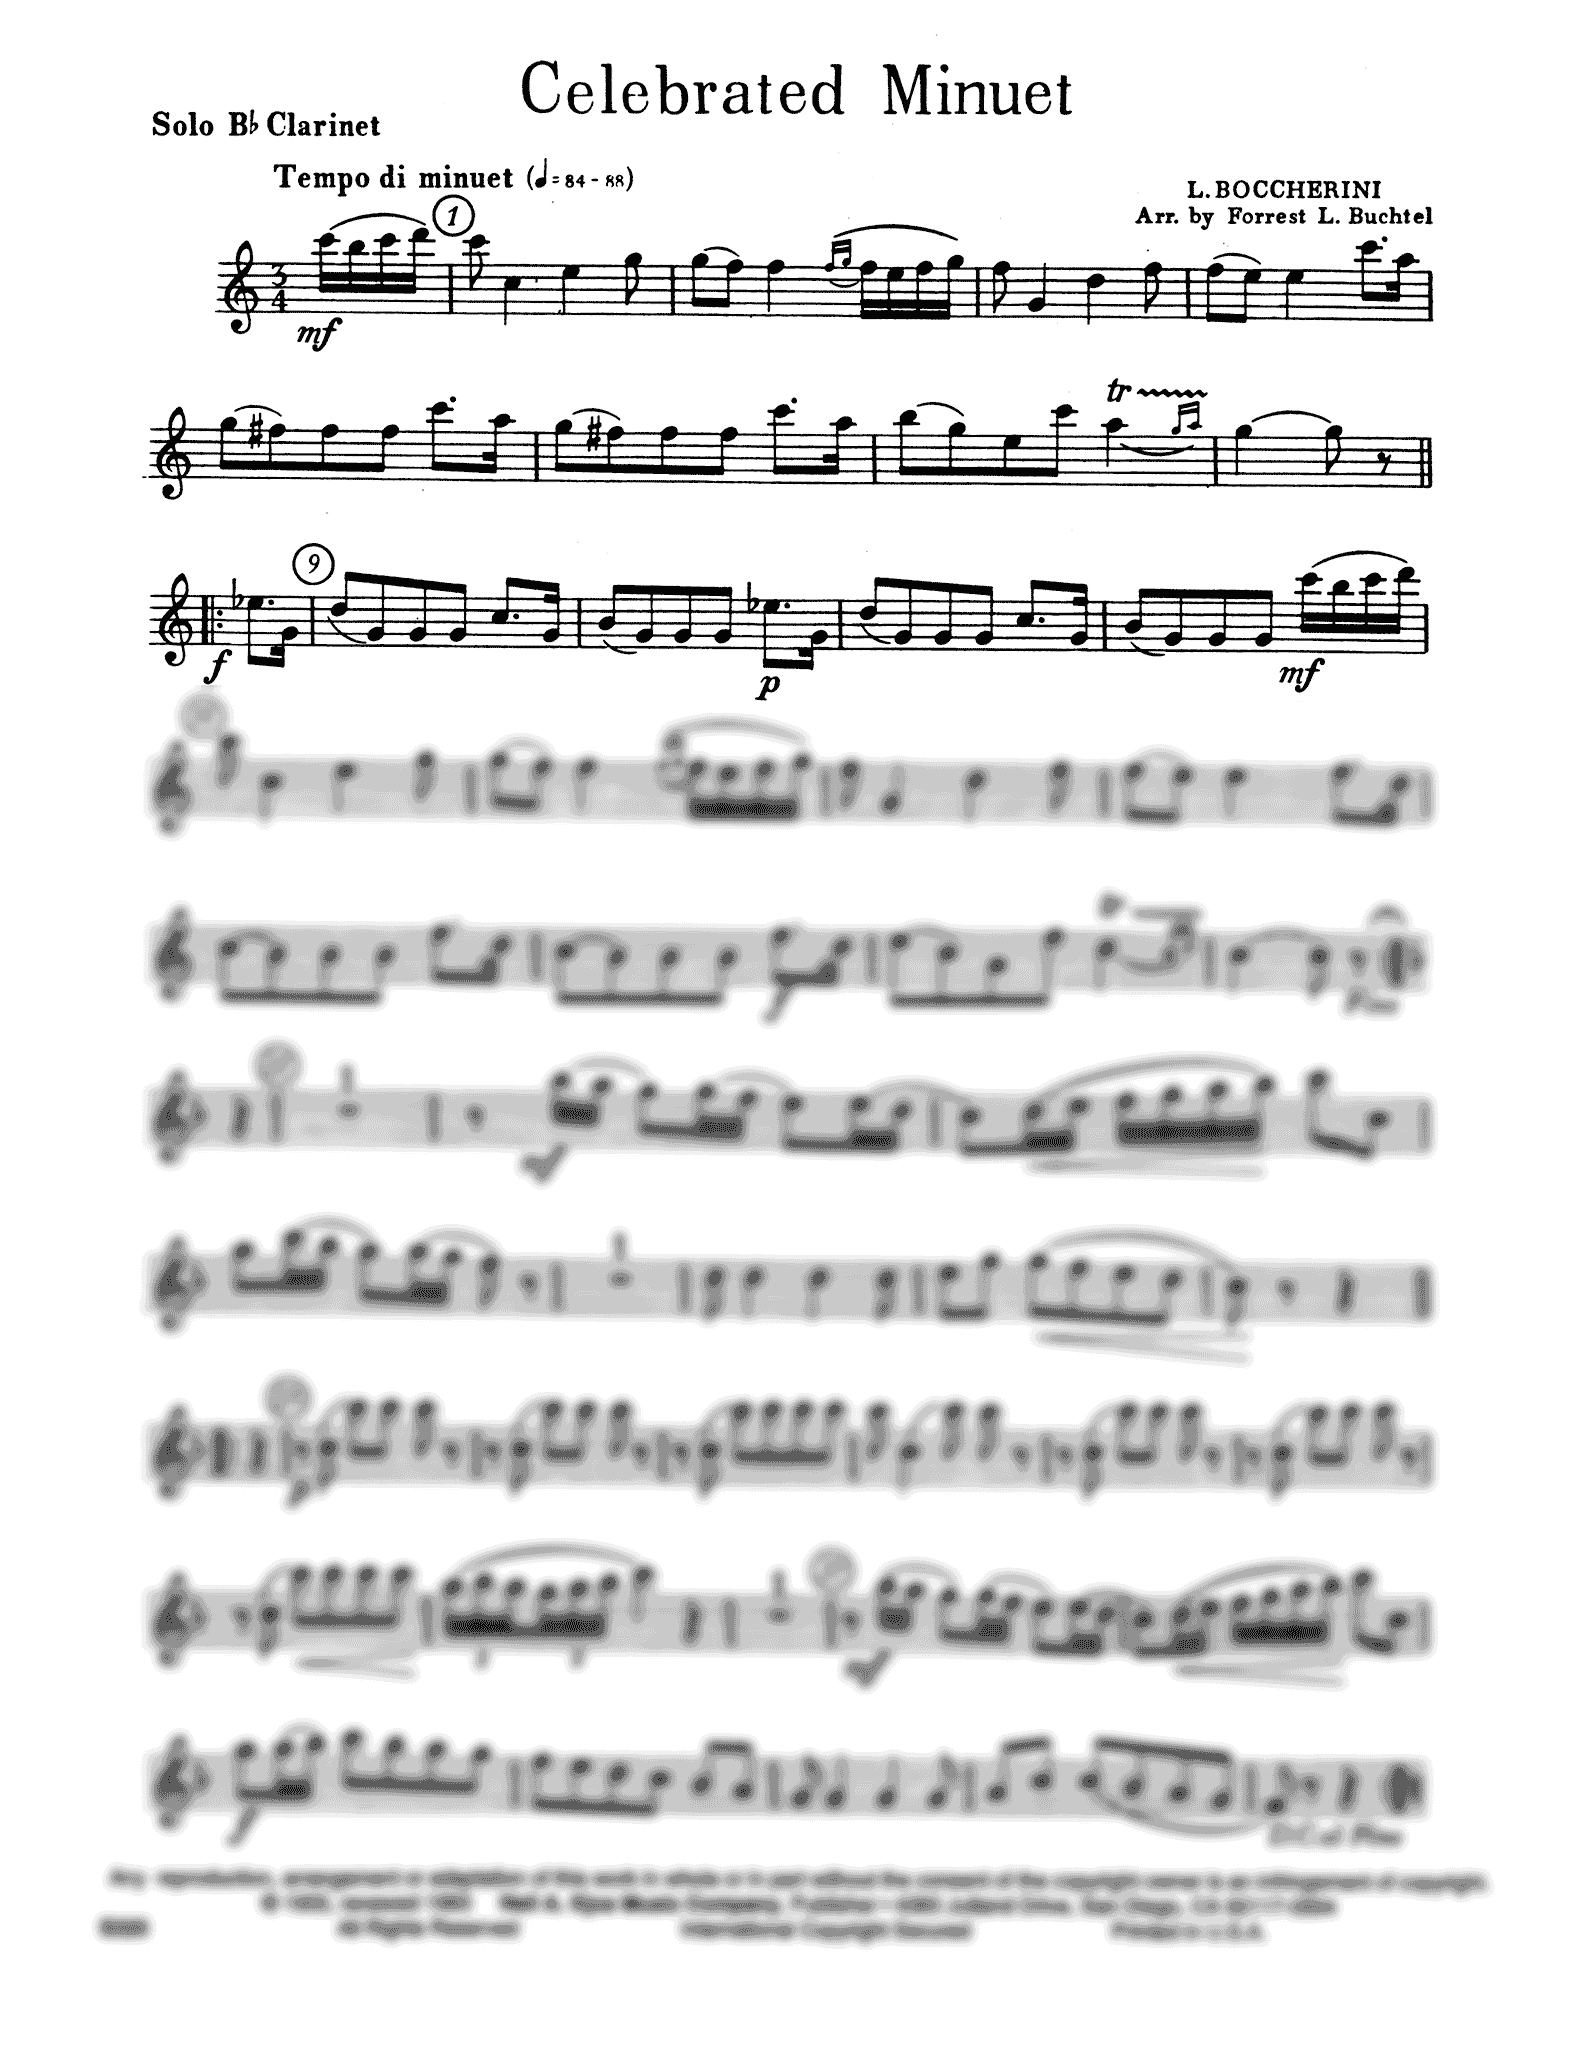 Celebrated Minuet, from String Quintet in E Major, Op. 11 No. 5 Clarinet part